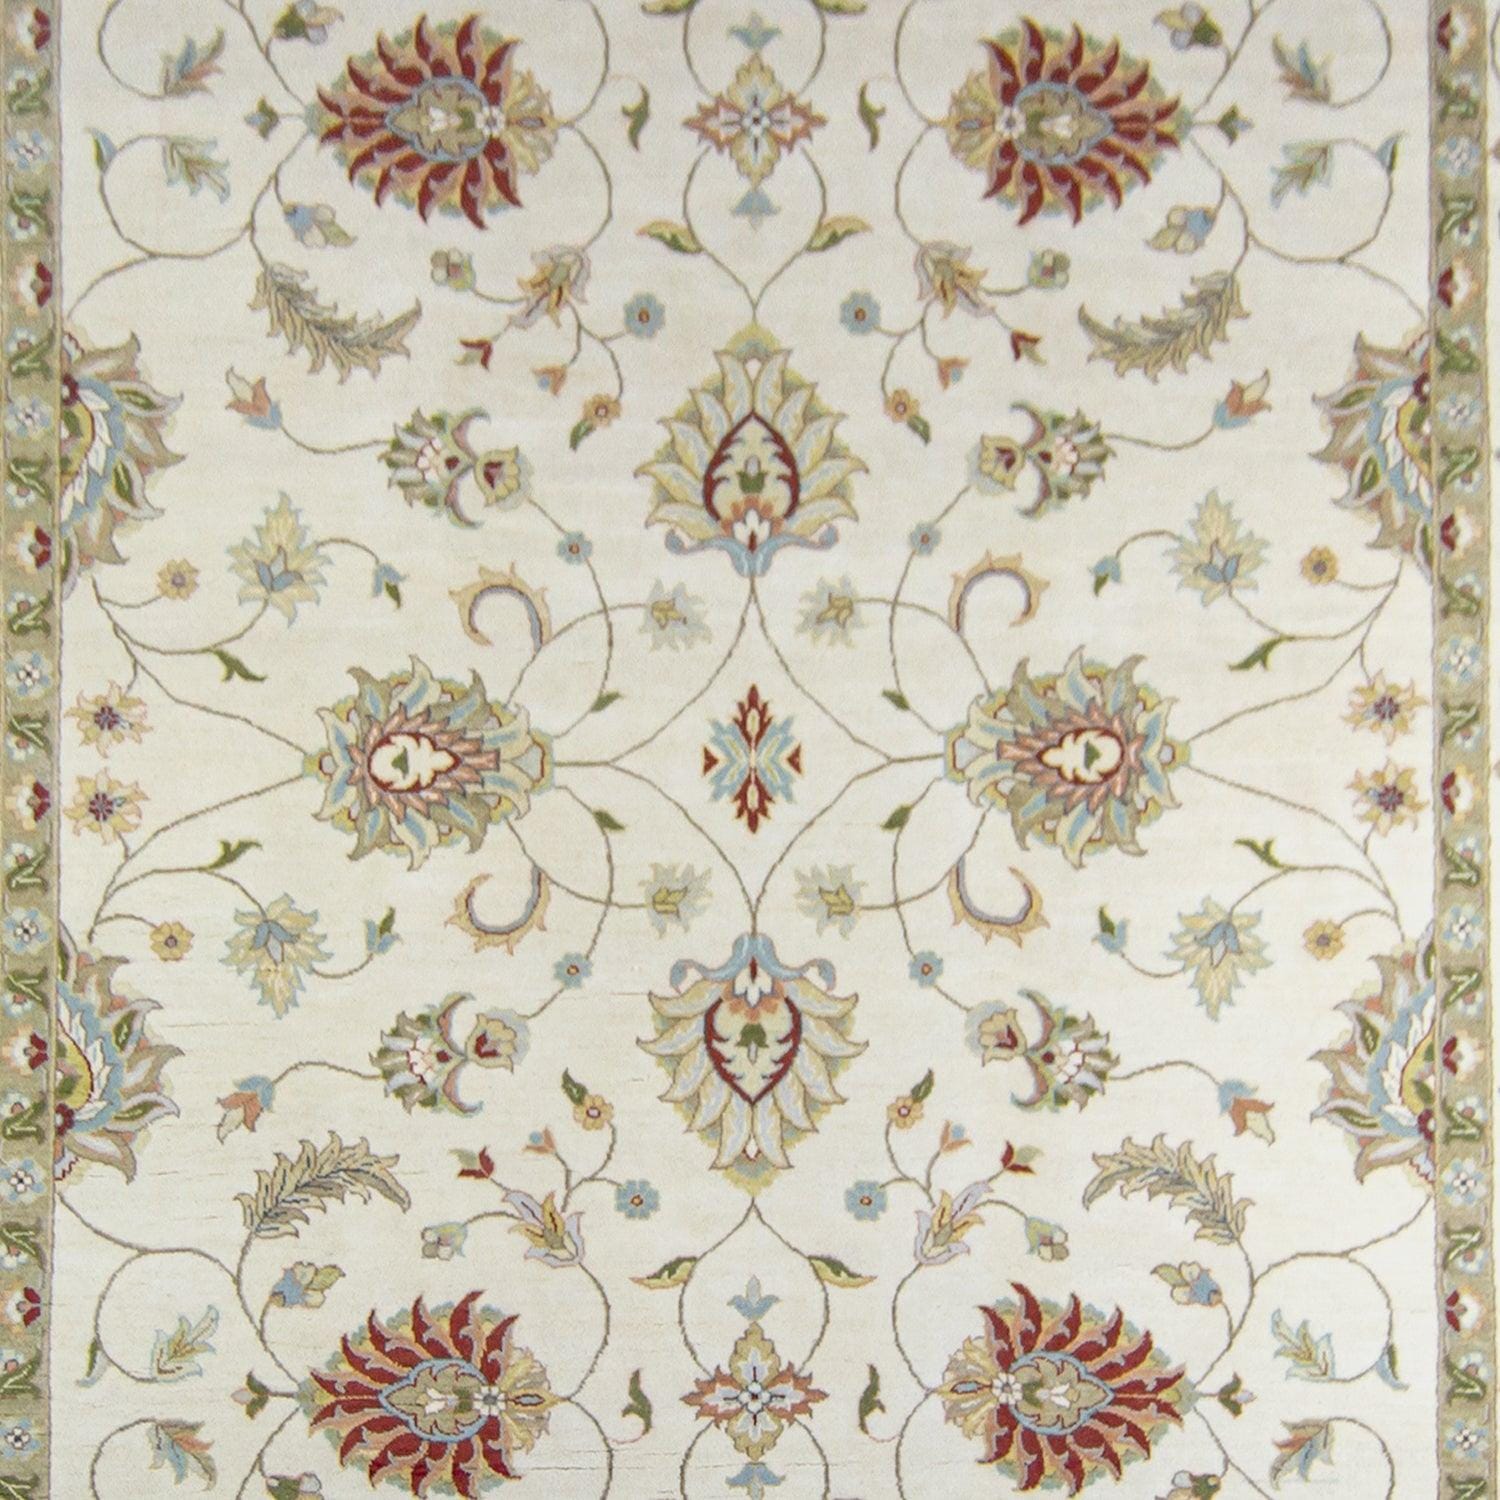 Fine Hand-knotted Wool Traditional Rug 247cm x 316cm